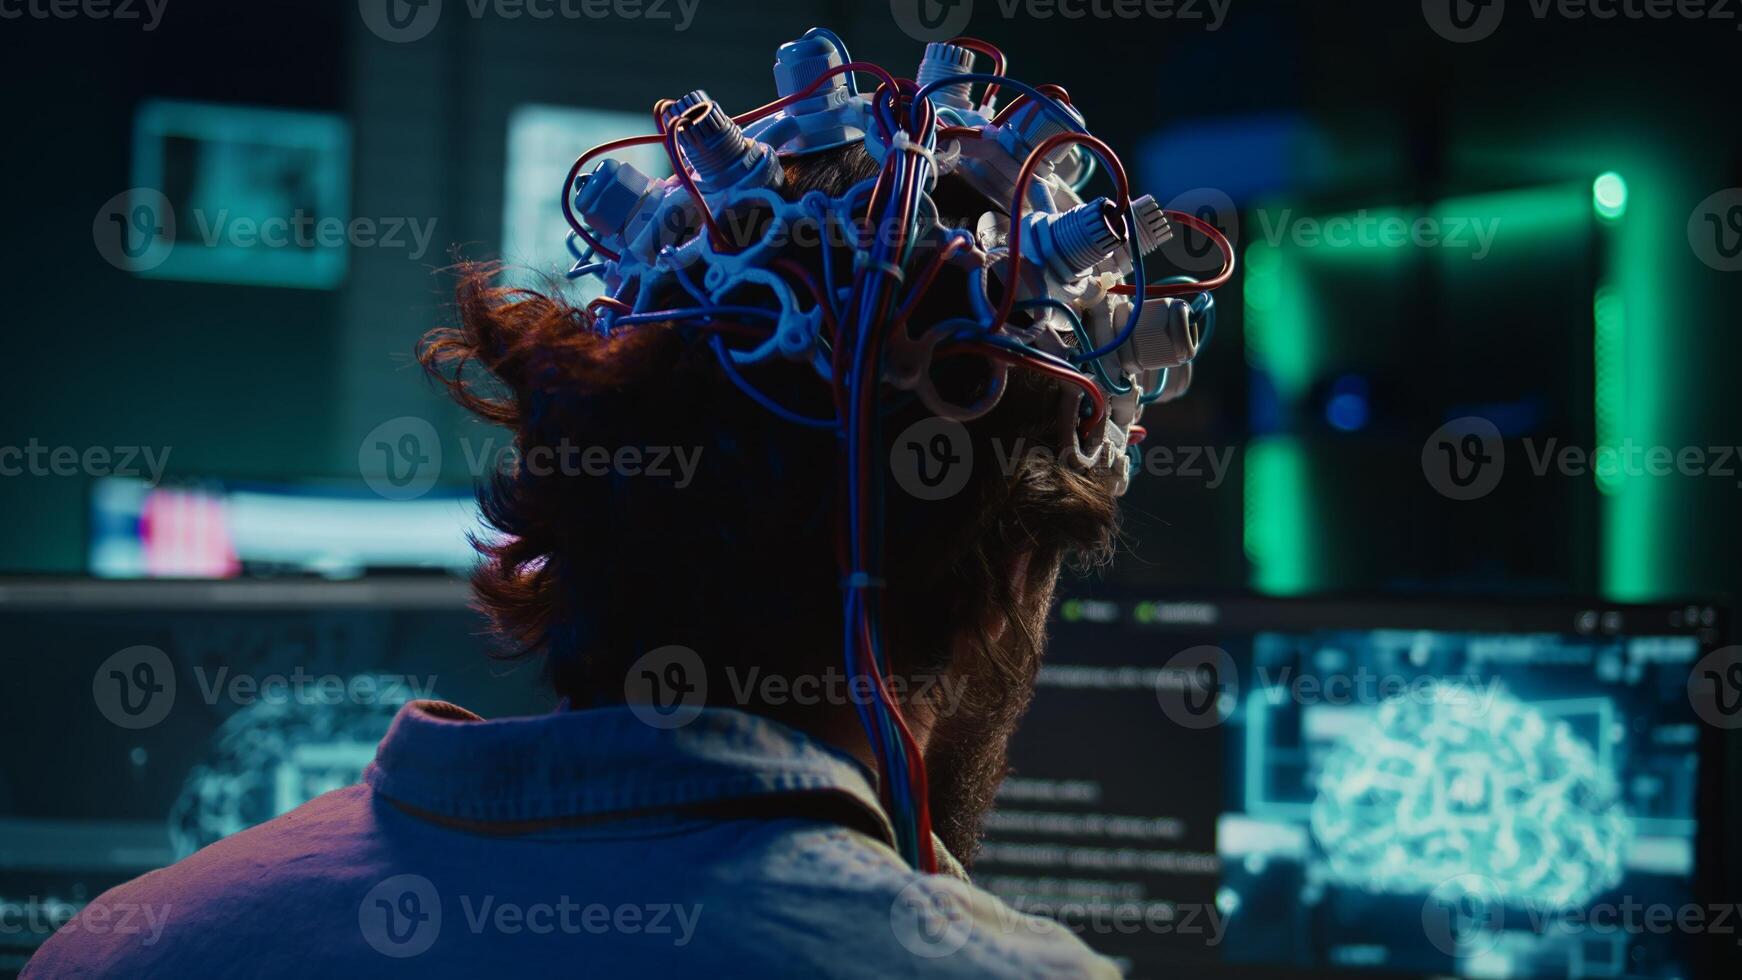 Engineer puts EEG headset on, links brain to cyberspace, conducts experiments. Man merging mind with artificial intelligence, uploading consciousness, achieving superintelligence, camera B close up photo